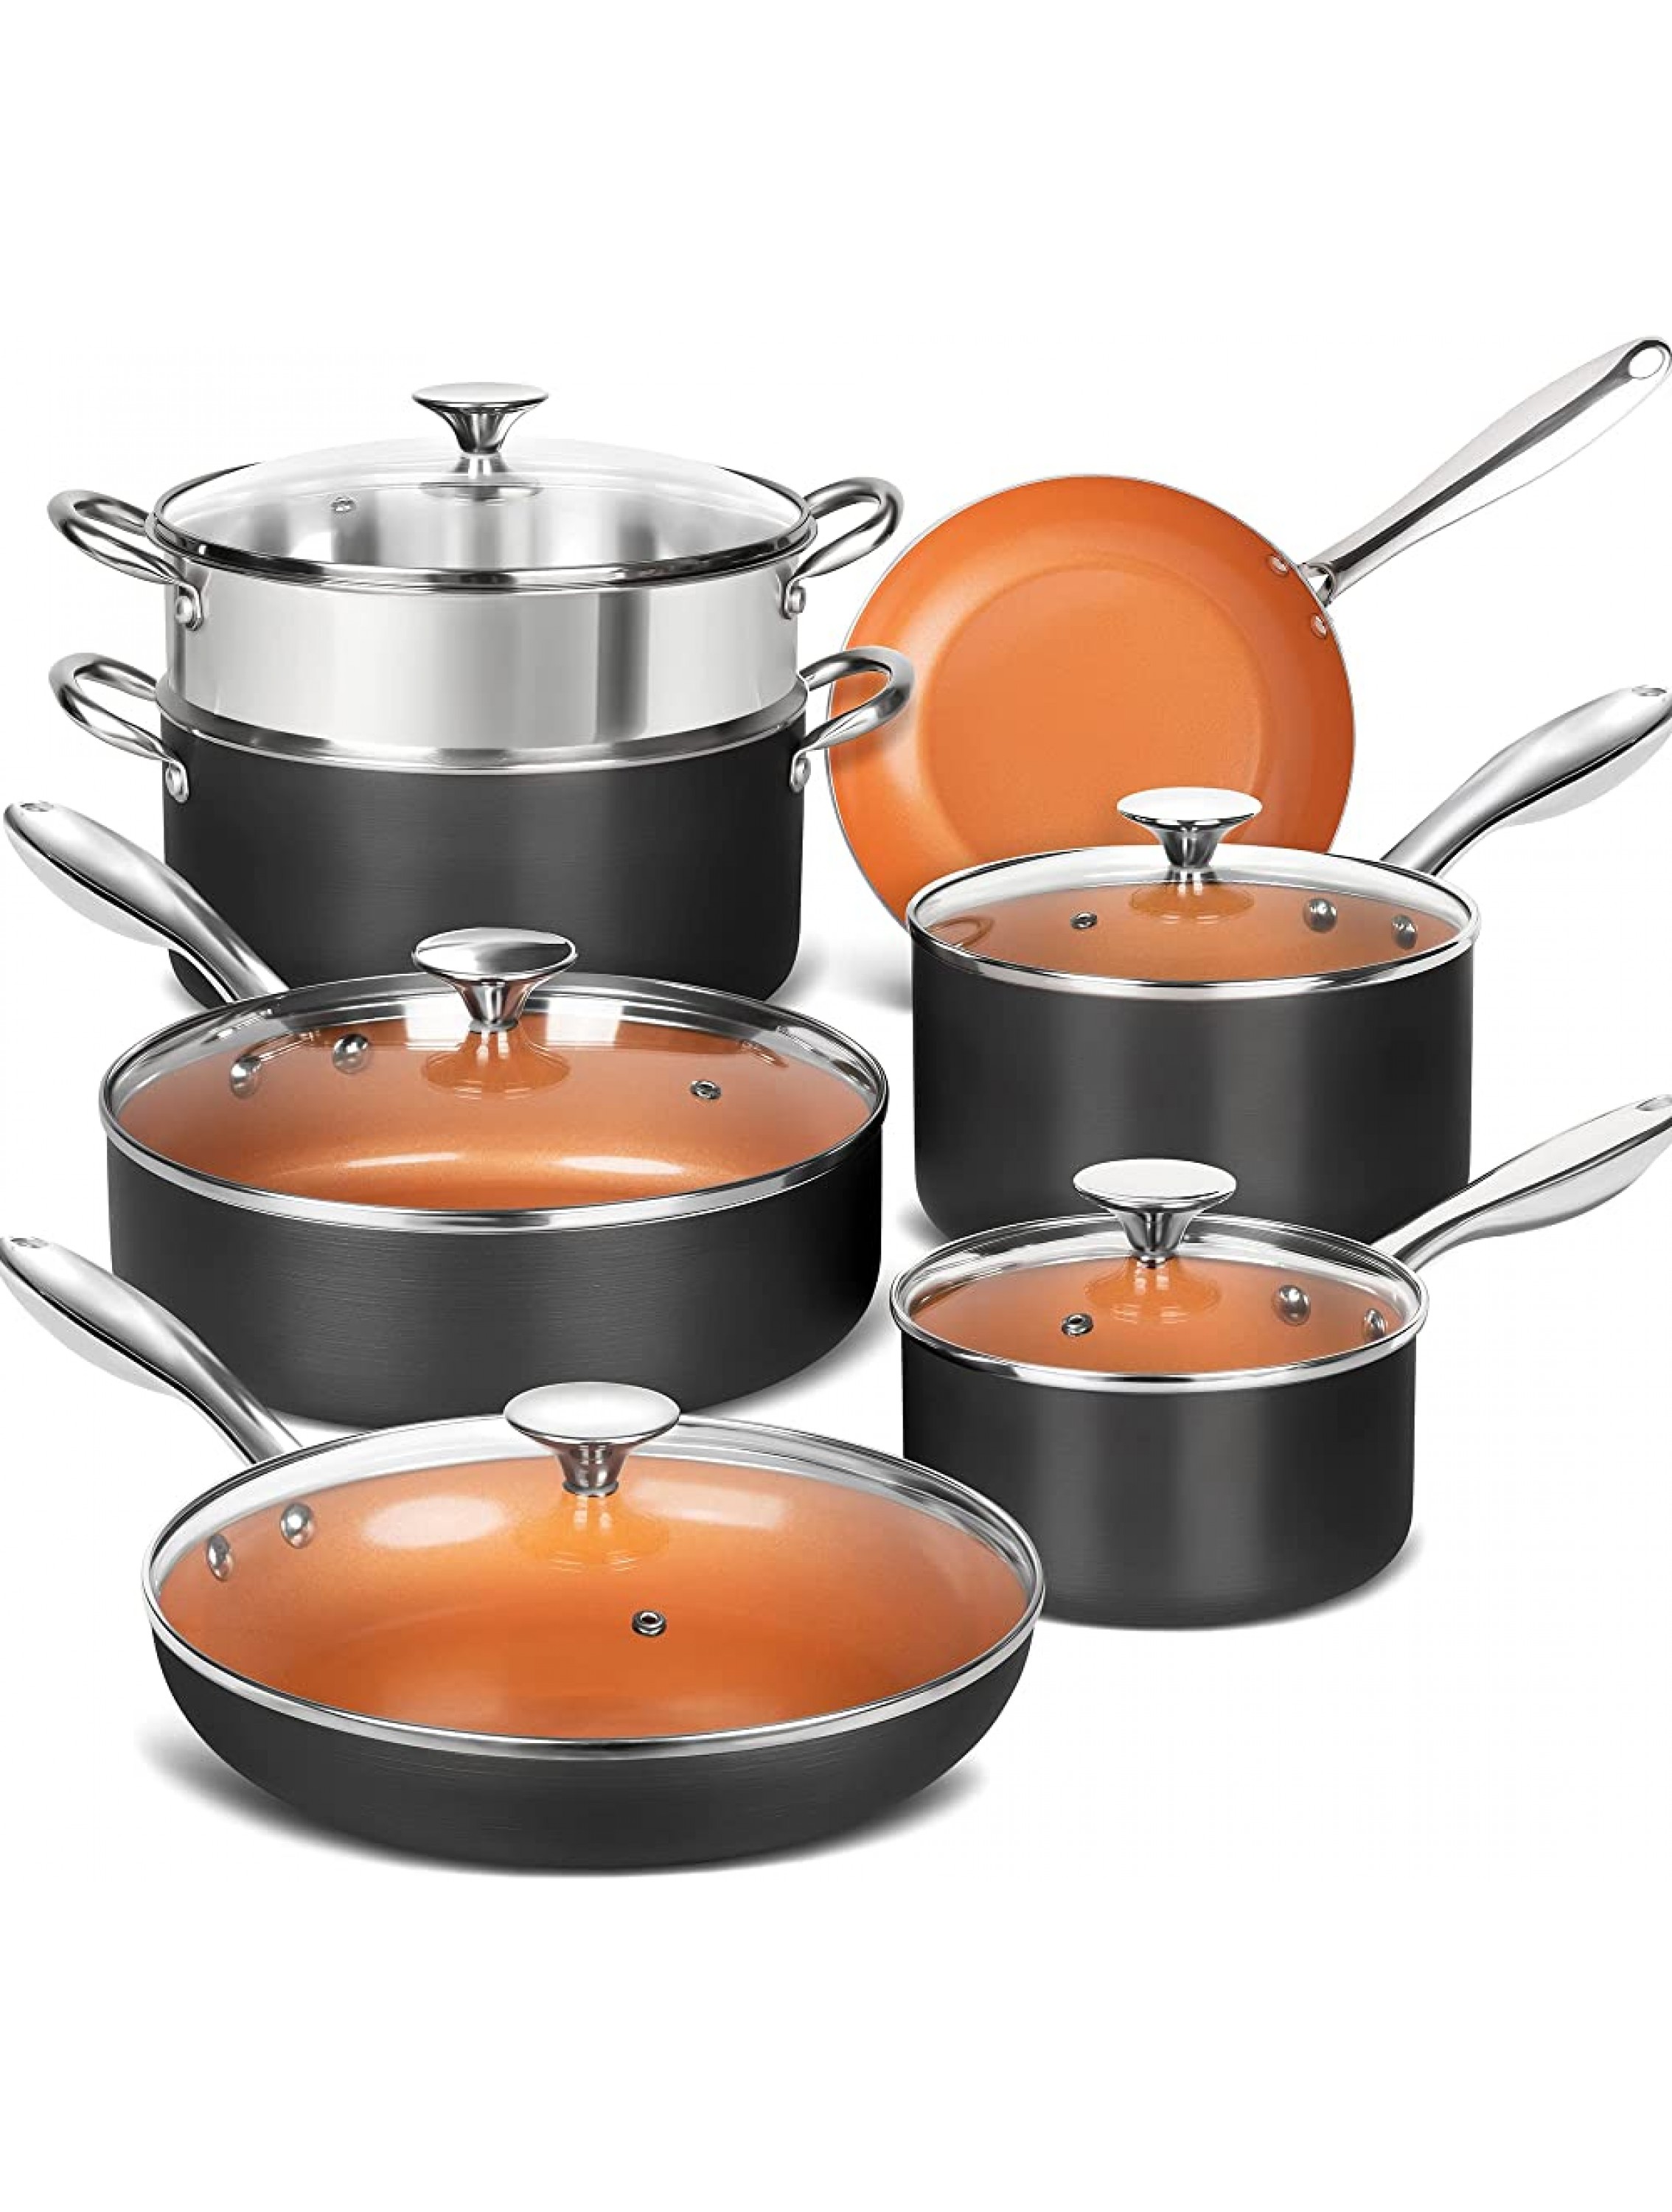 MICHELANGELO Copper Pots and Pans Set Nonstick Hard Anodized Cookware Set With Ceramic Coating Induction Pots and Pans Copper Cookware Set Essential Ceramic Cookware Set 12-Piece - BOQYHG1LV